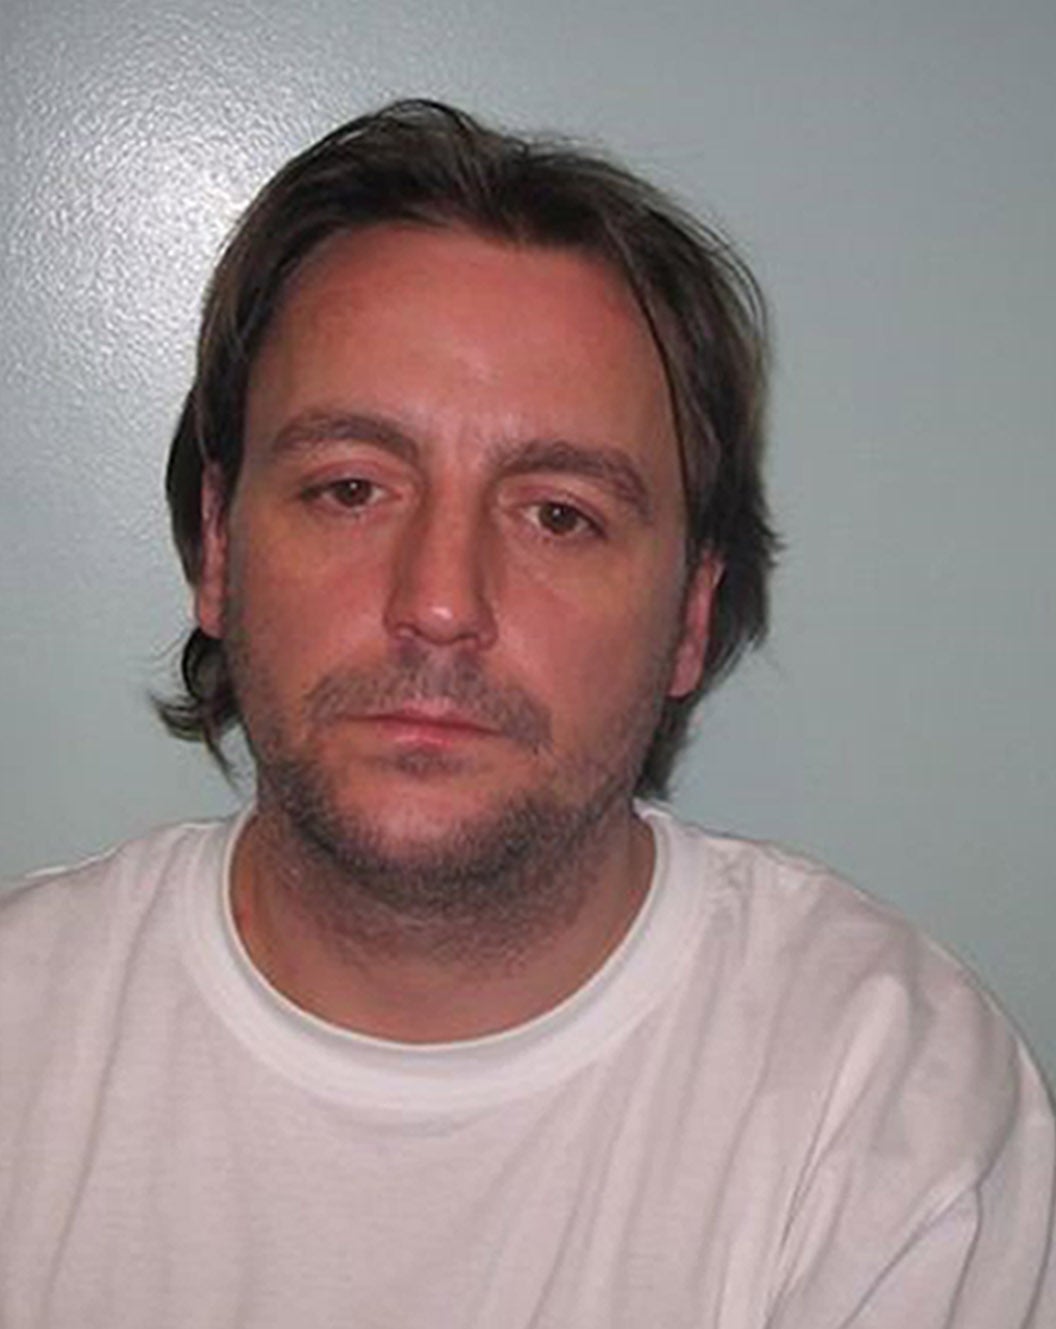 Trevor Baker, 53, left his ex-girlfriend with an irreparable brain injury after he struck her in the head with a rubber mallet in 2009